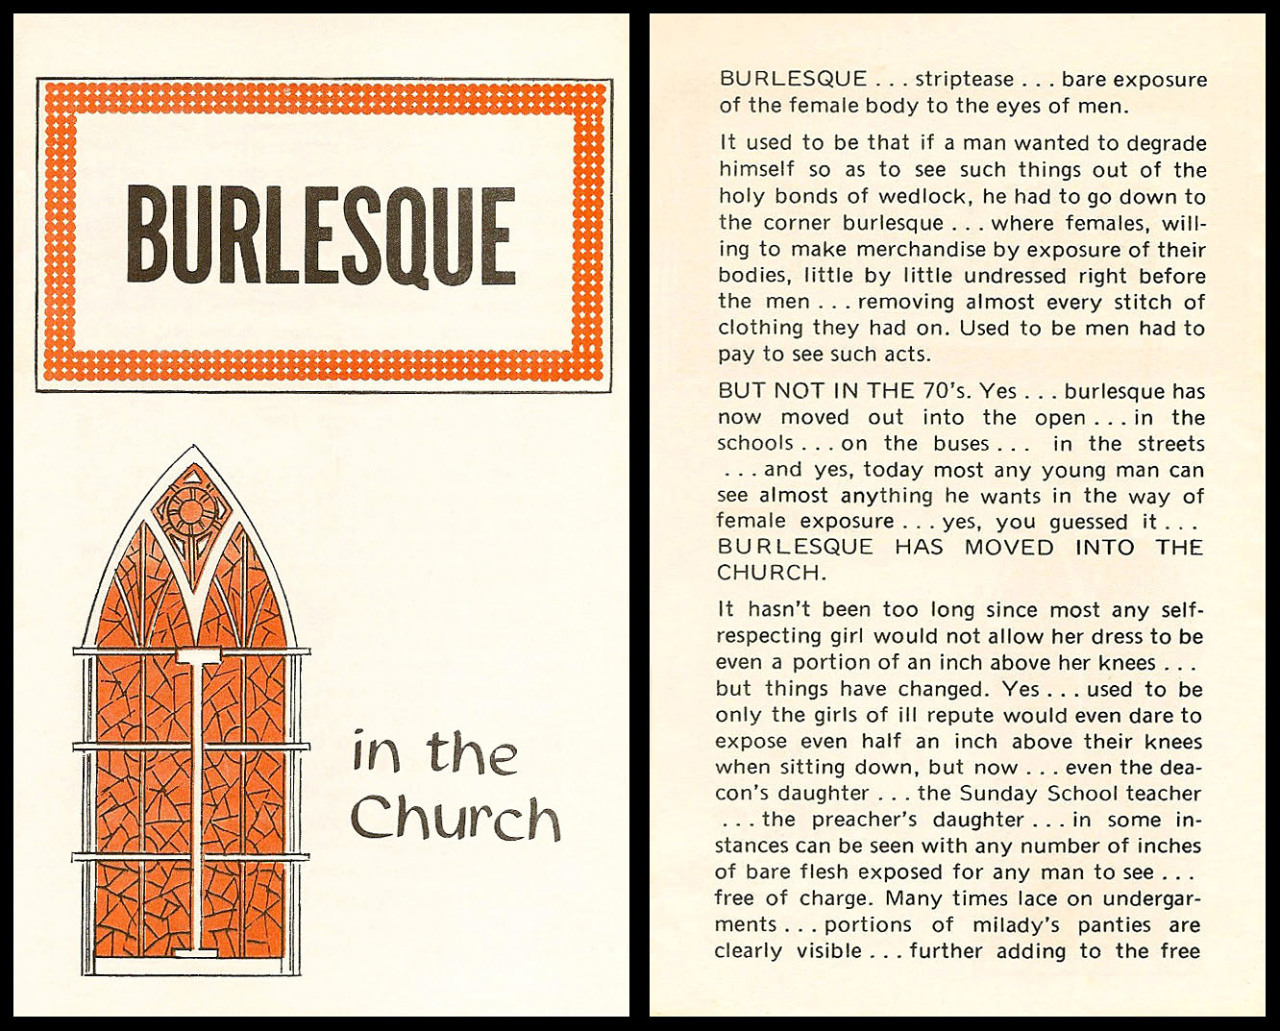 BURLESQUE HAS MOVED INTO THE CHURCH!!Vintage 70′s-era religious tract detailing